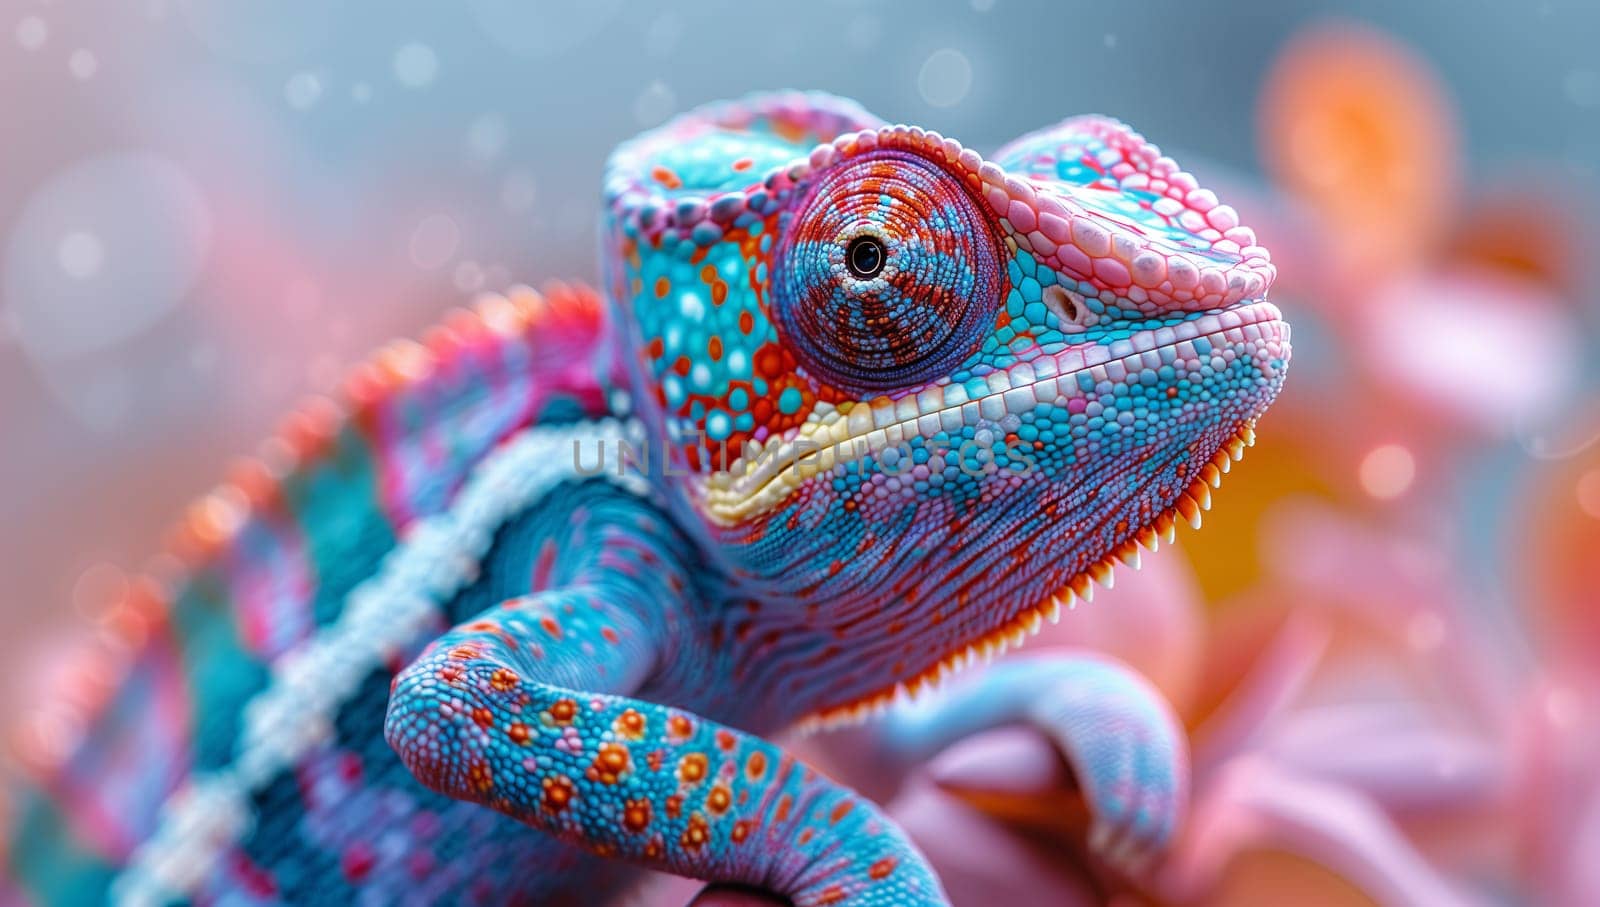 Electric blue lizard perched on pink flower, closeup shot in macro photography by richwolf